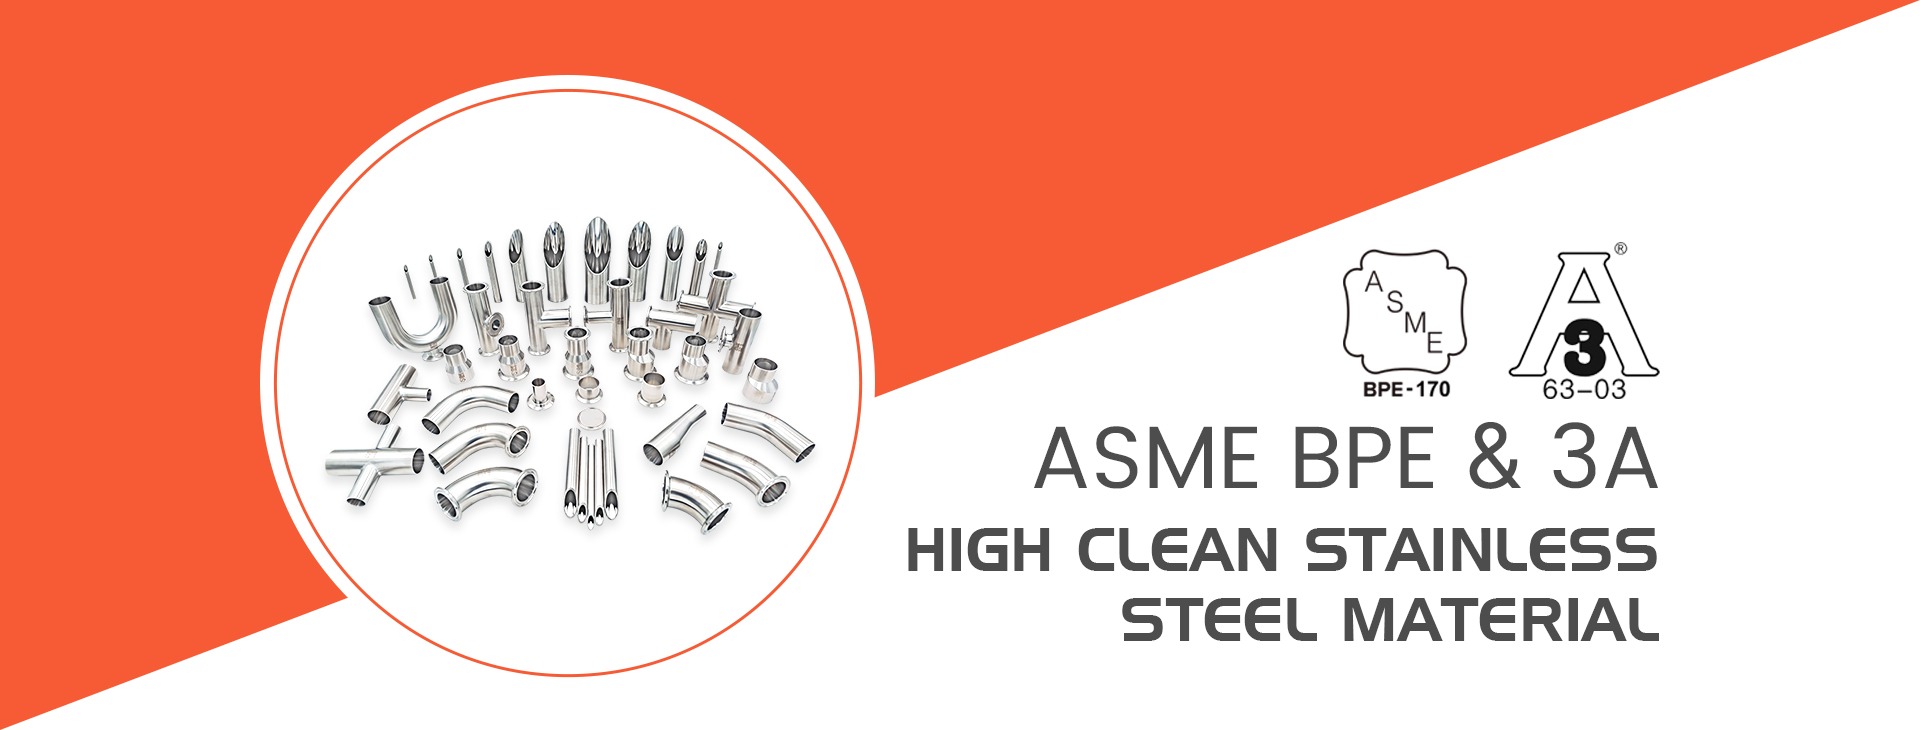 High clean stainless steel material